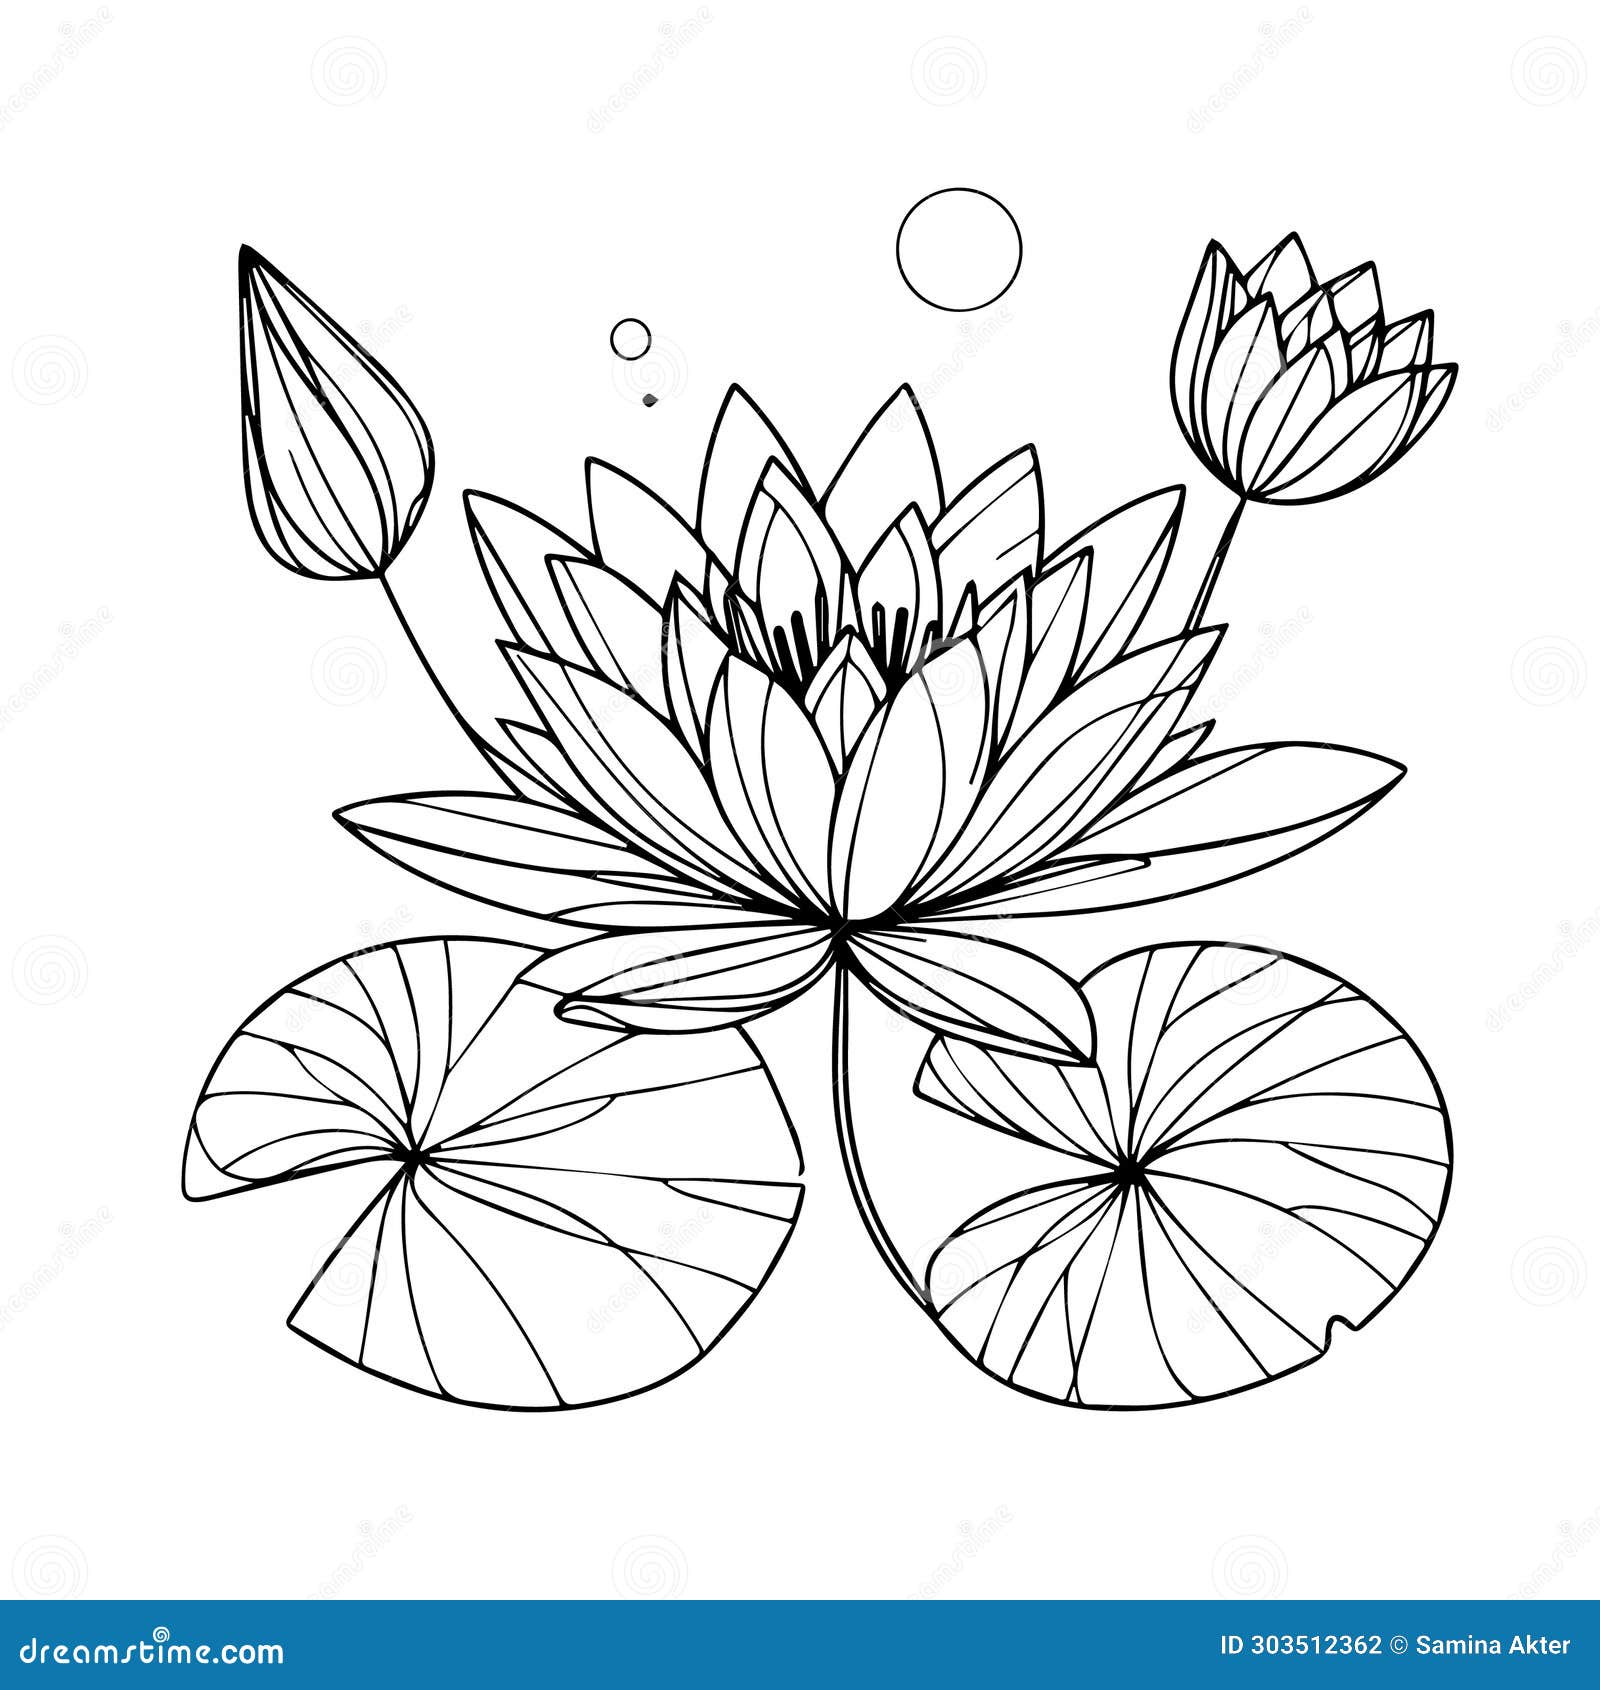 How to Draw a Floral designs drawing | Drawing Flowers easy | Floral design  drawing, Flower drawing, Easy flower drawings